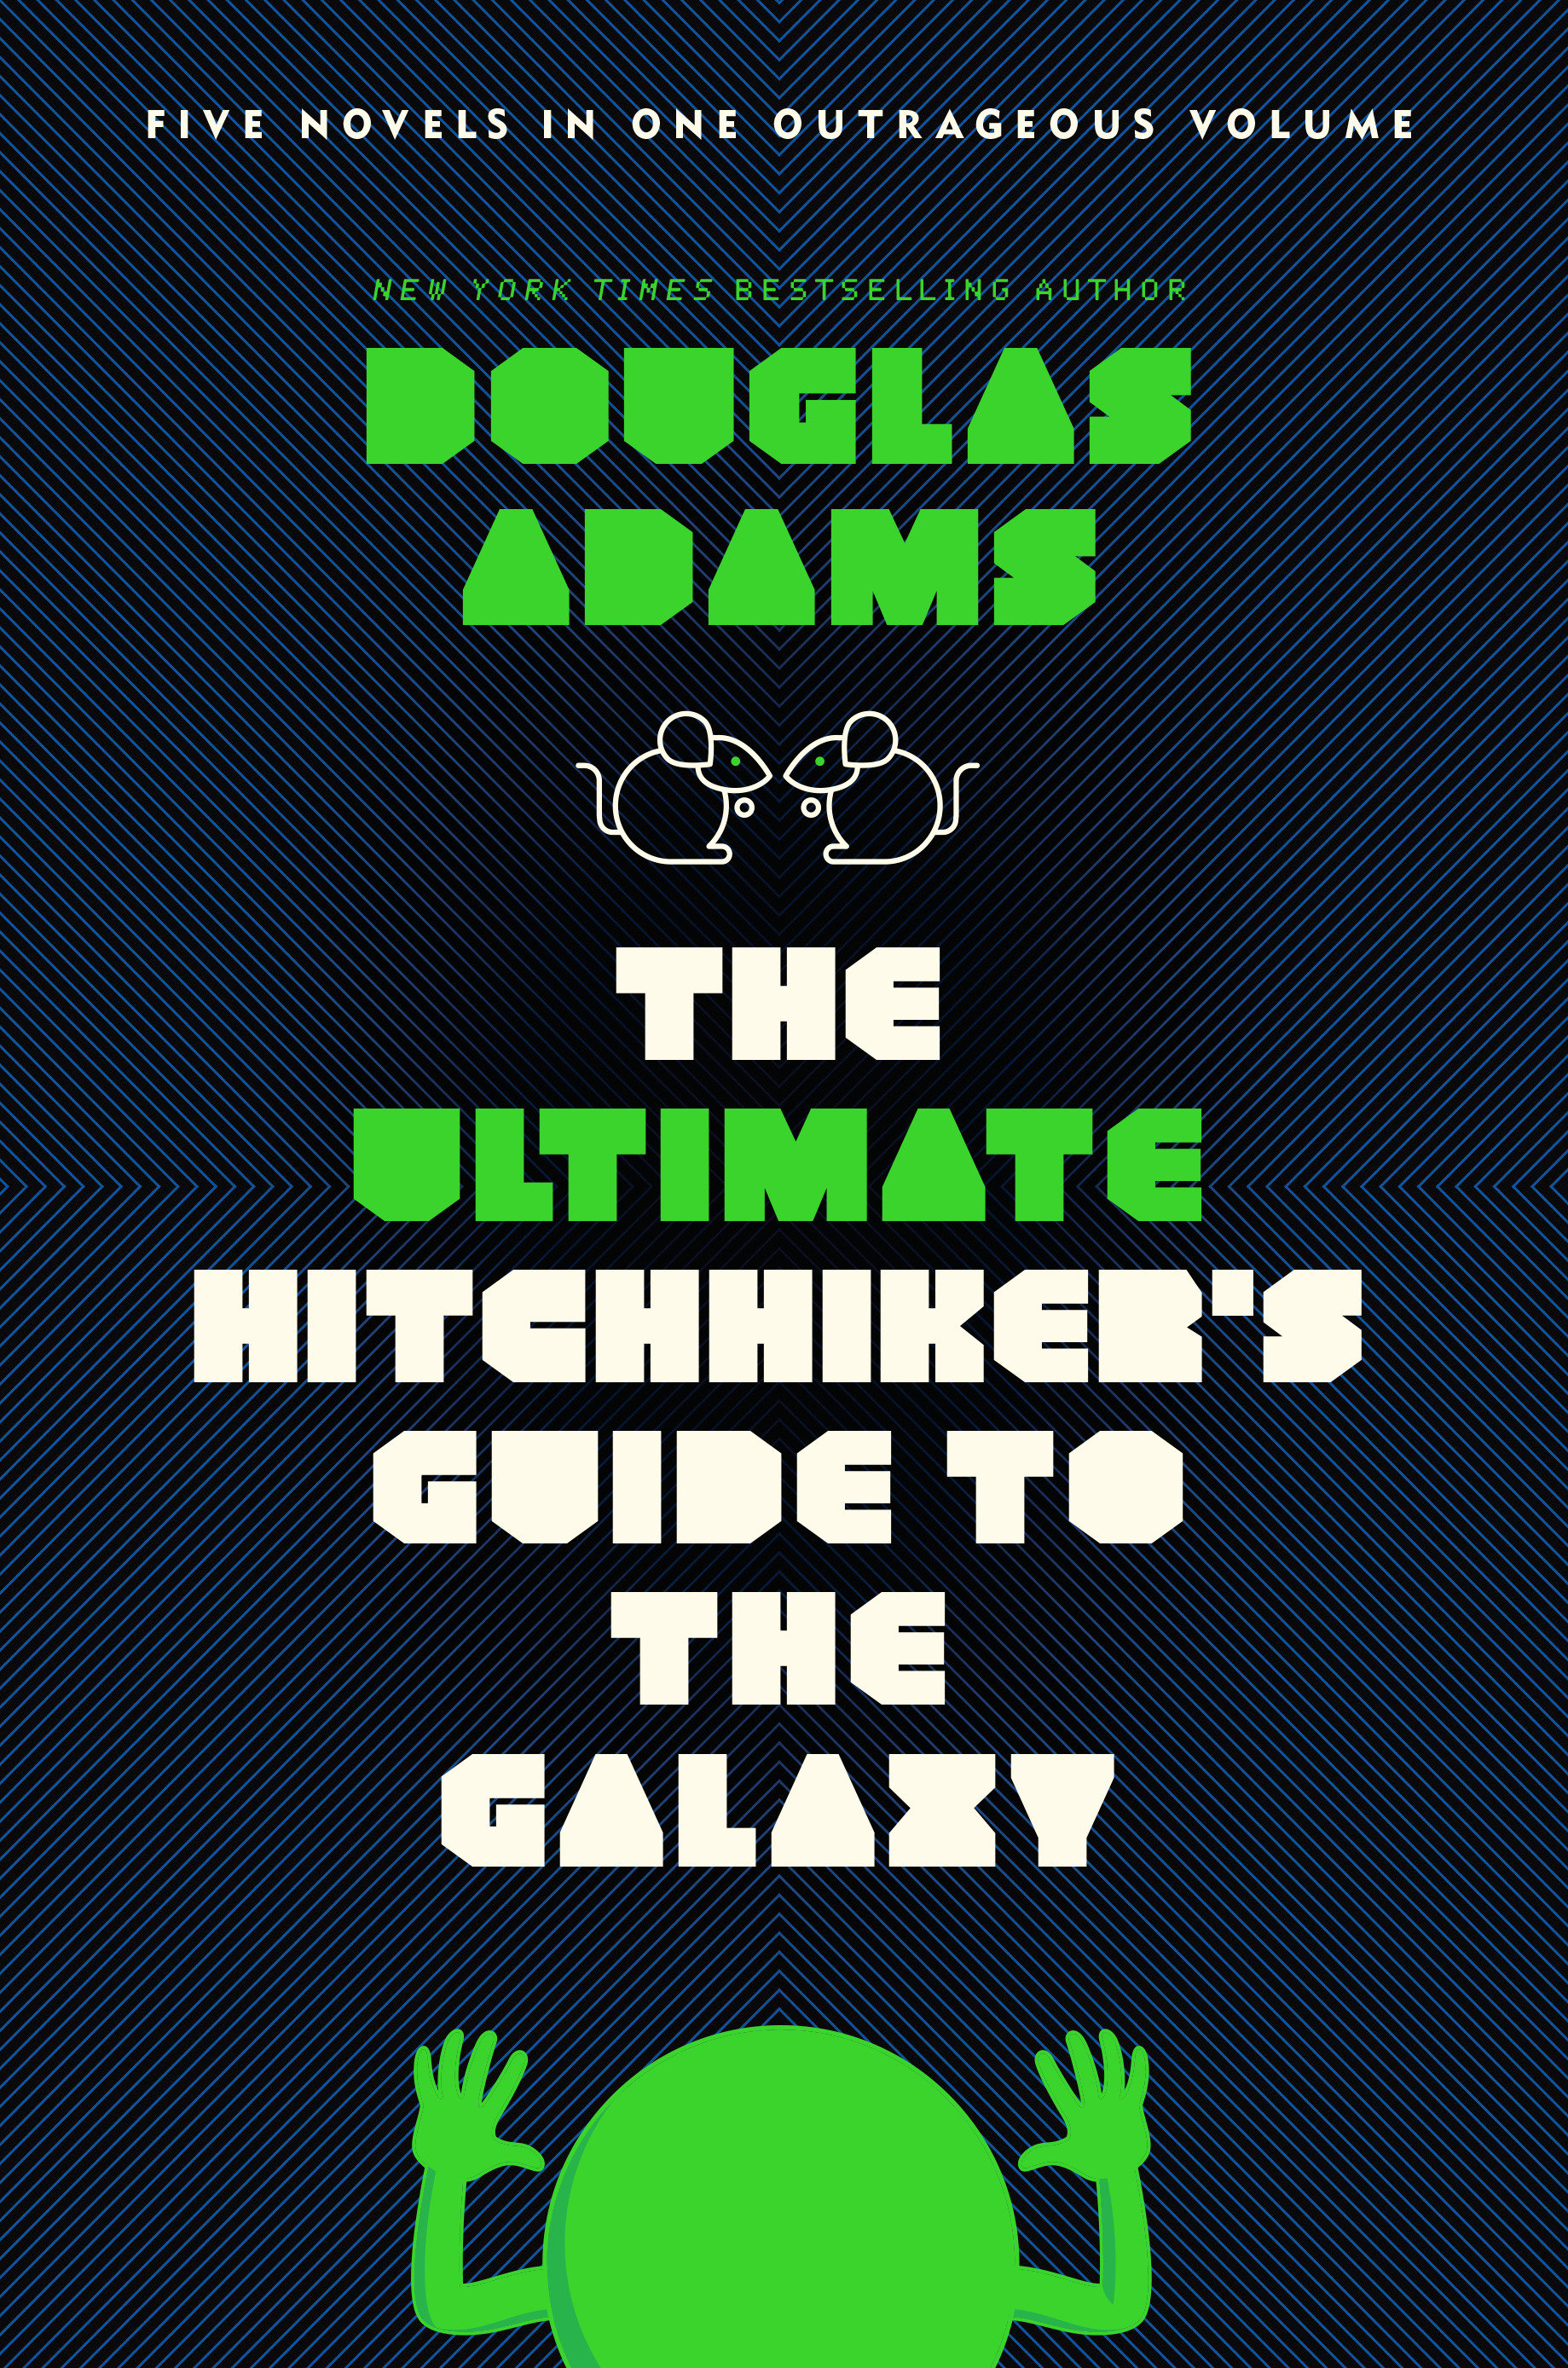 Image de couverture de The Ultimate Hitchhiker's Guide to the Galaxy [electronic resource] : Five Novels in One Outrageous Volume